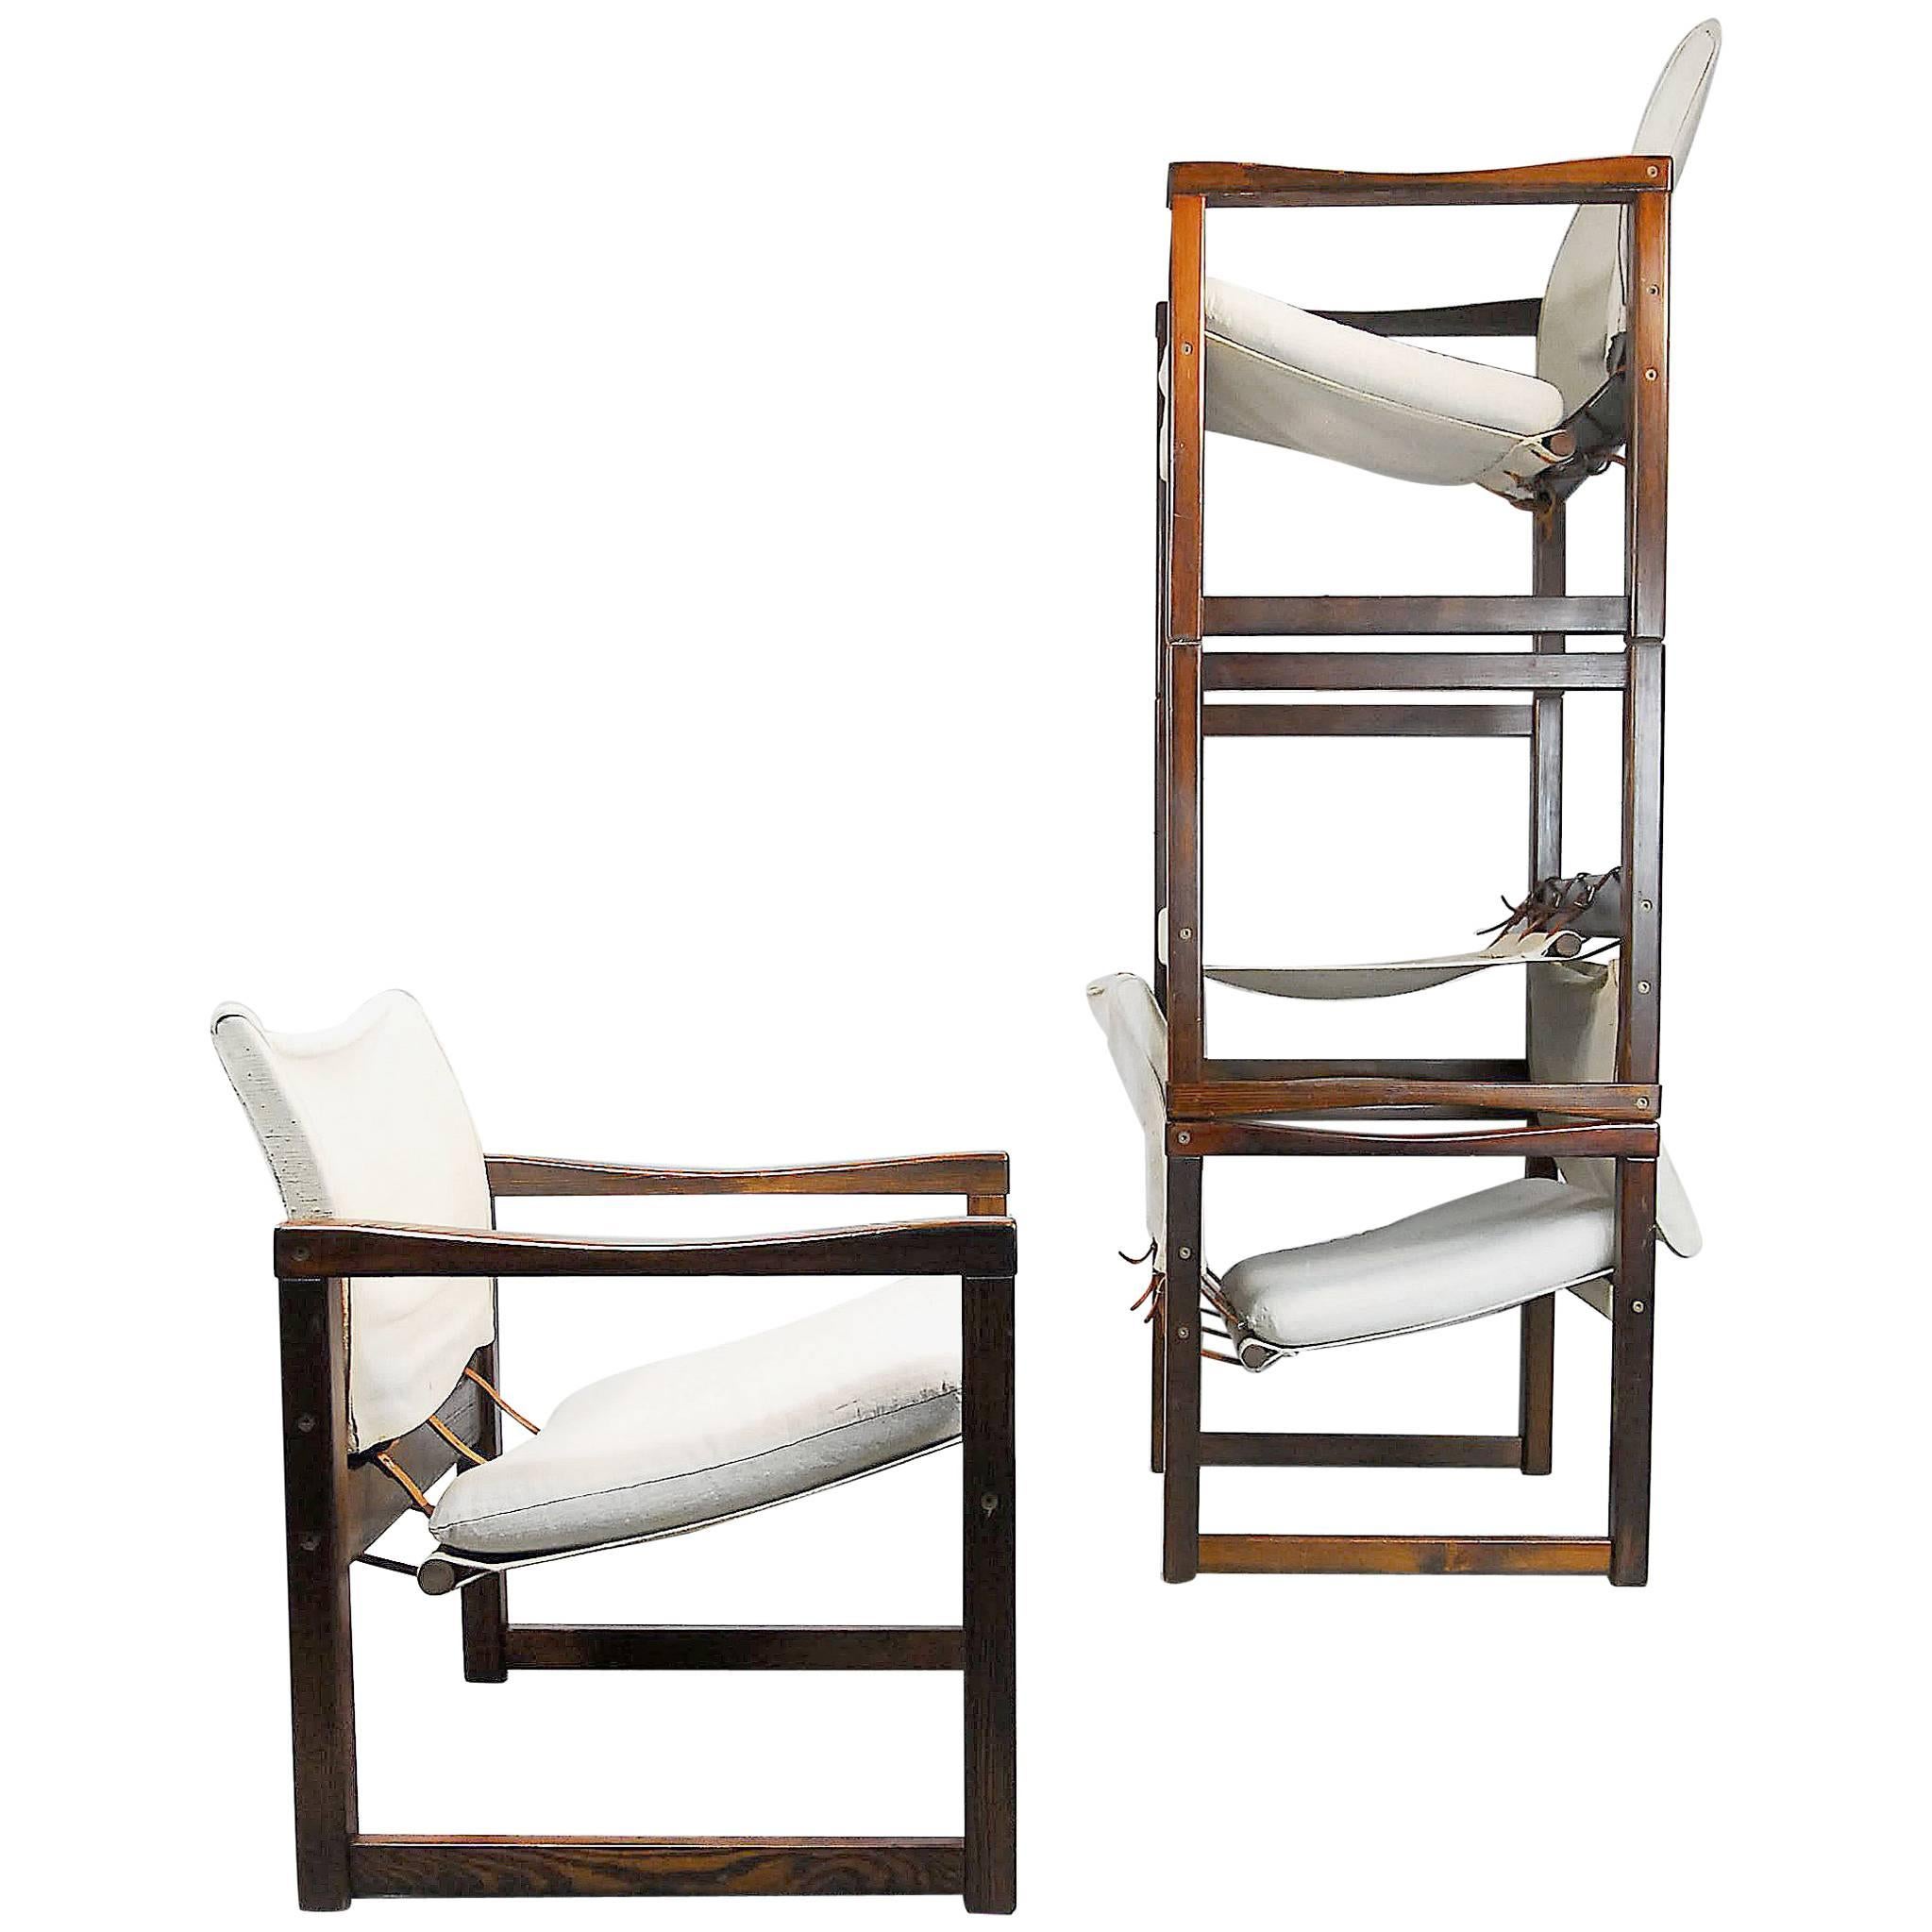 Diana Safari Canvas Chairs by Karin Mobring for Ikea, 1972, Set of Two